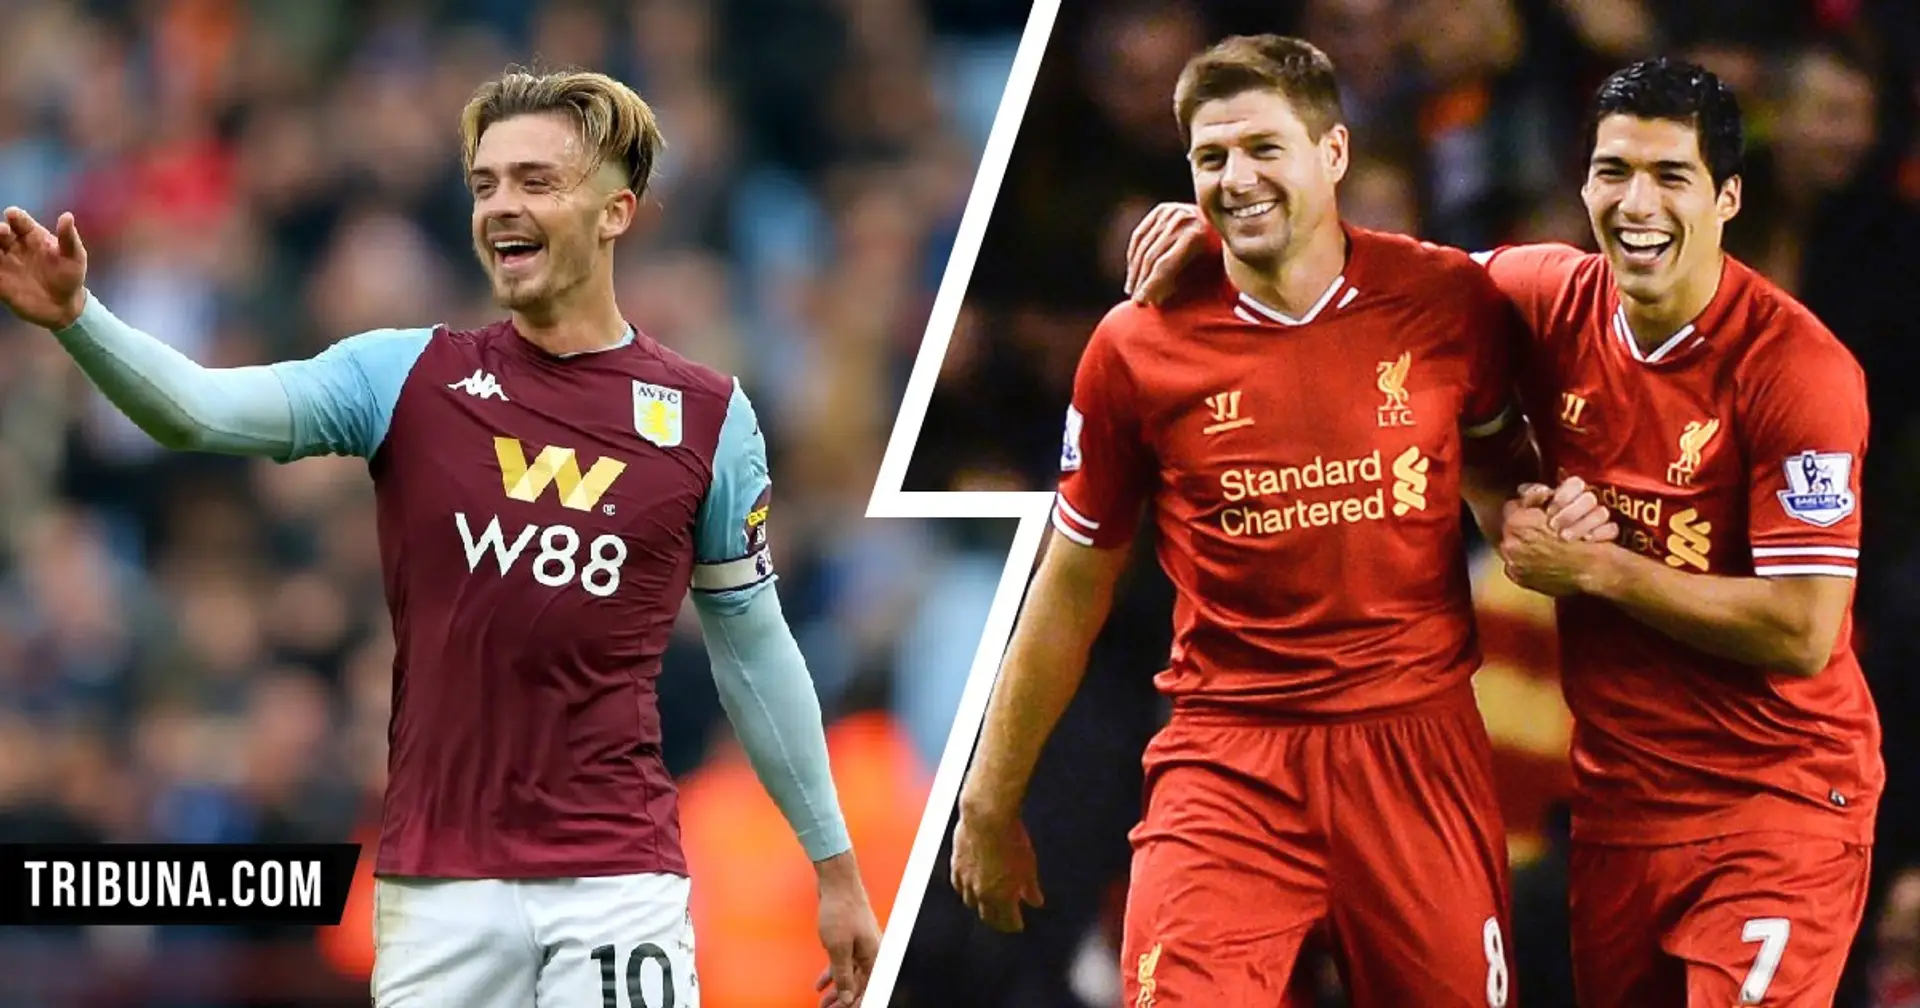 Old Grealish tweets show England playmaker's love for Liverpool stars